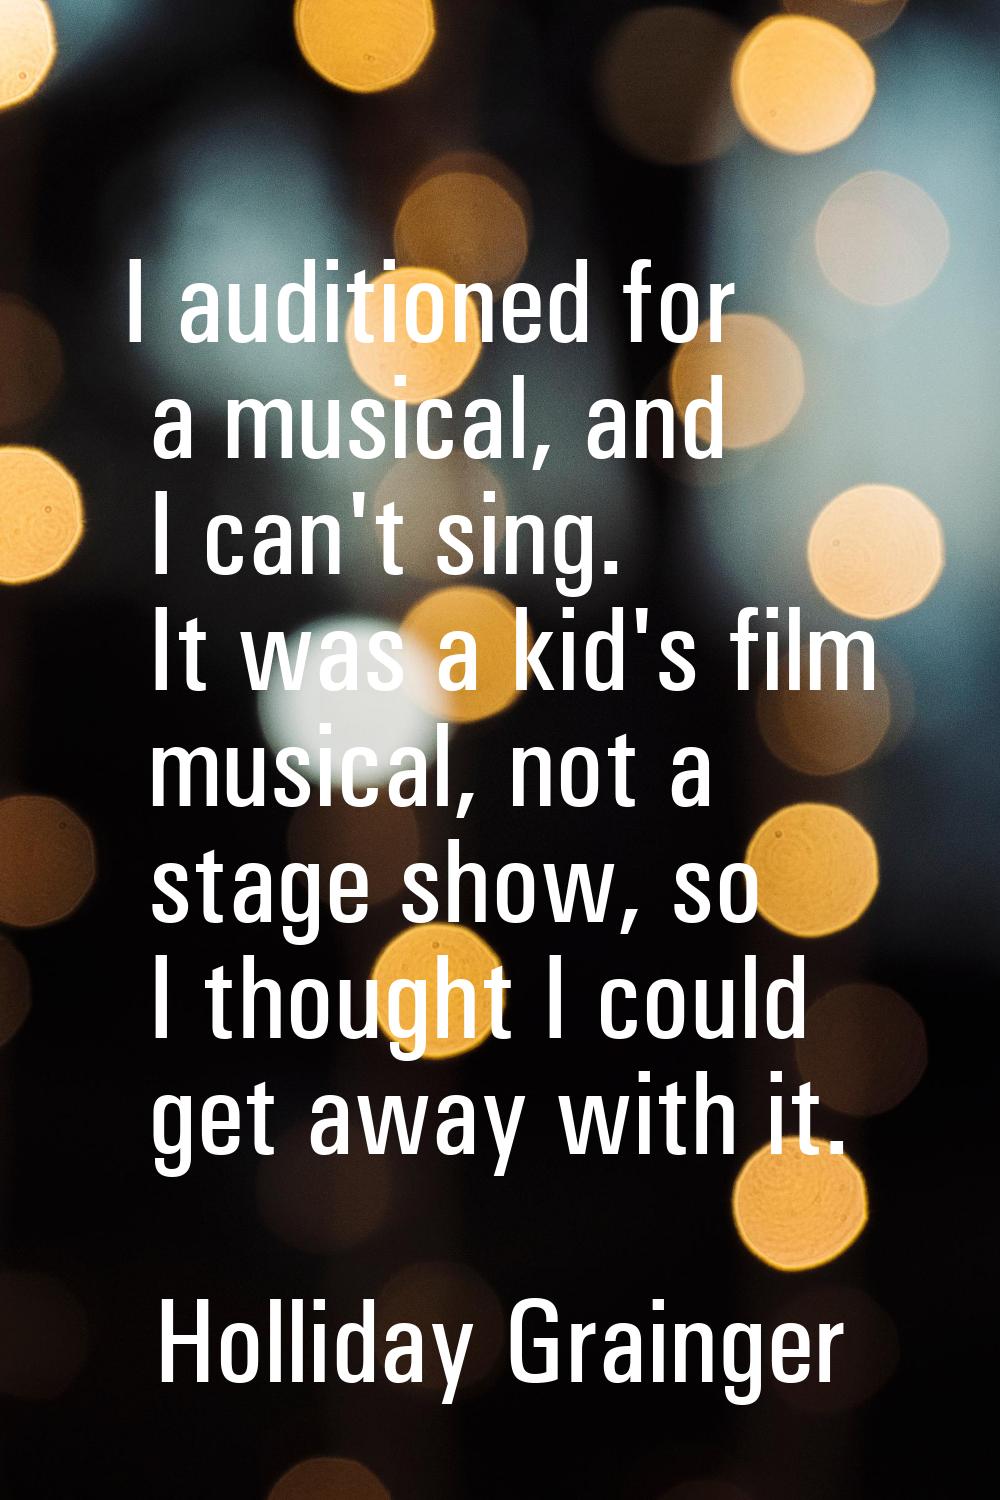 I auditioned for a musical, and I can't sing. It was a kid's film musical, not a stage show, so I t